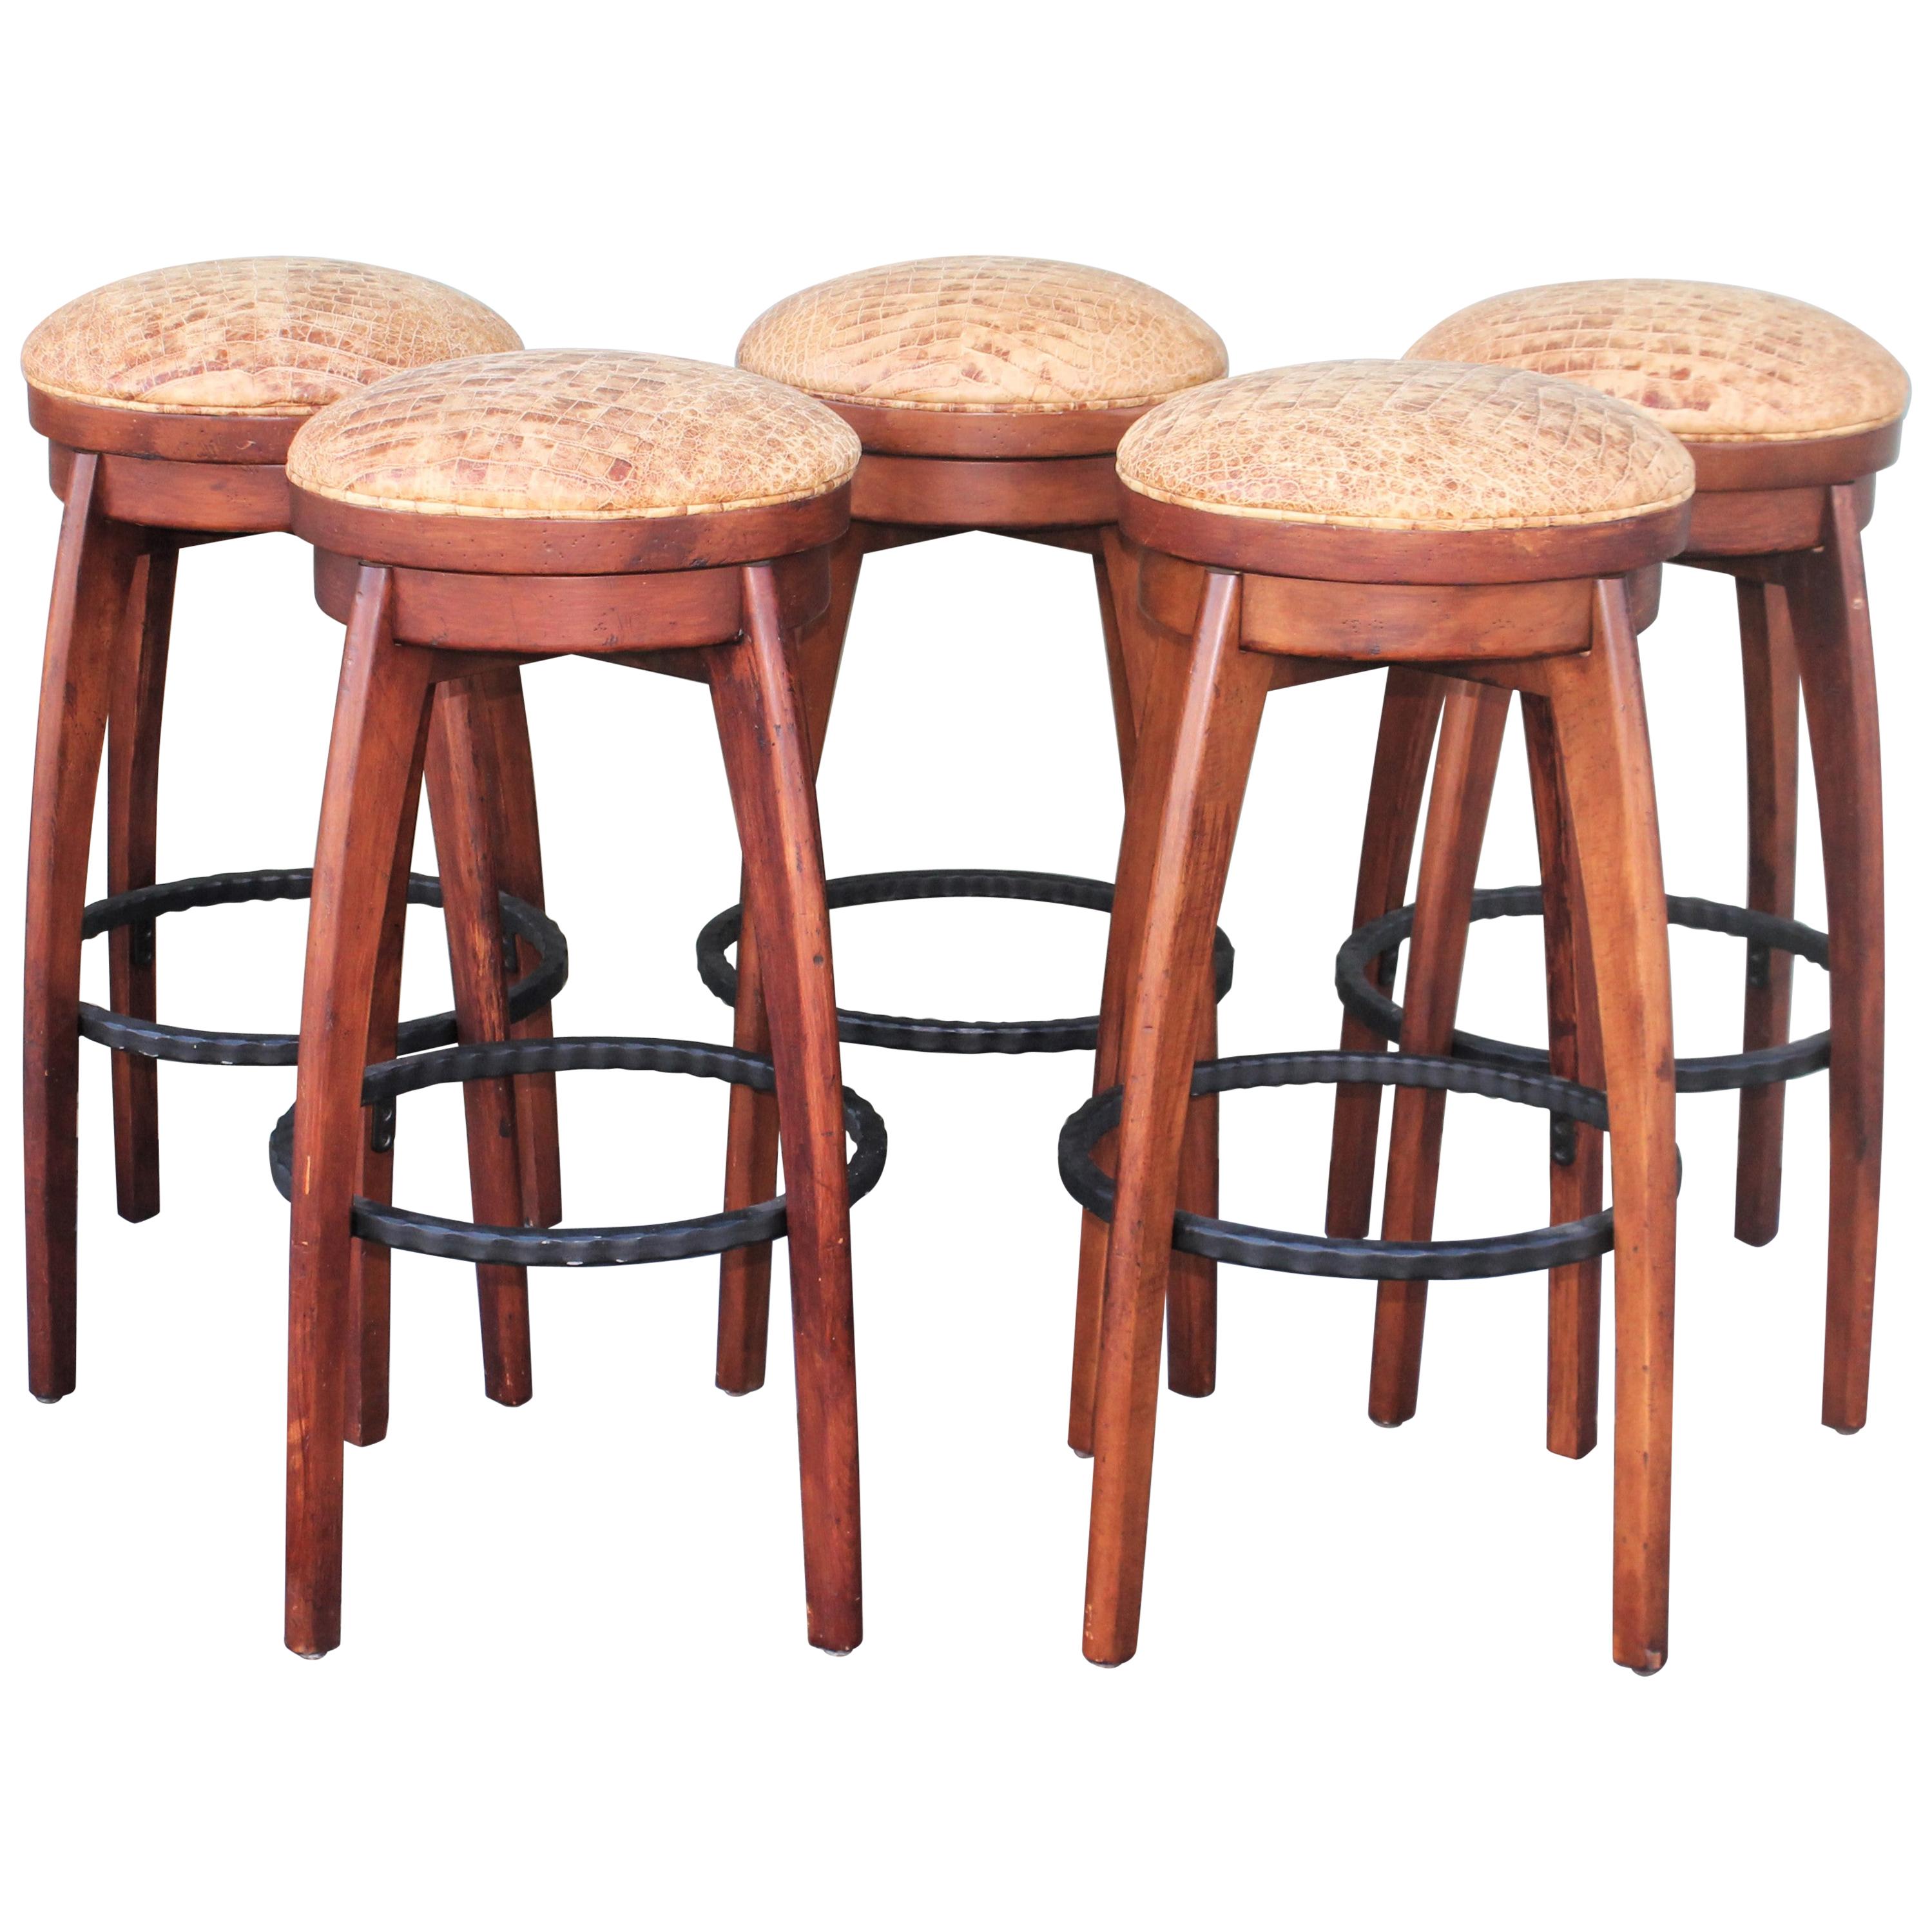 Rustic Bar Stools with Iron Foot Rest and Italian Distressed Leather, 5